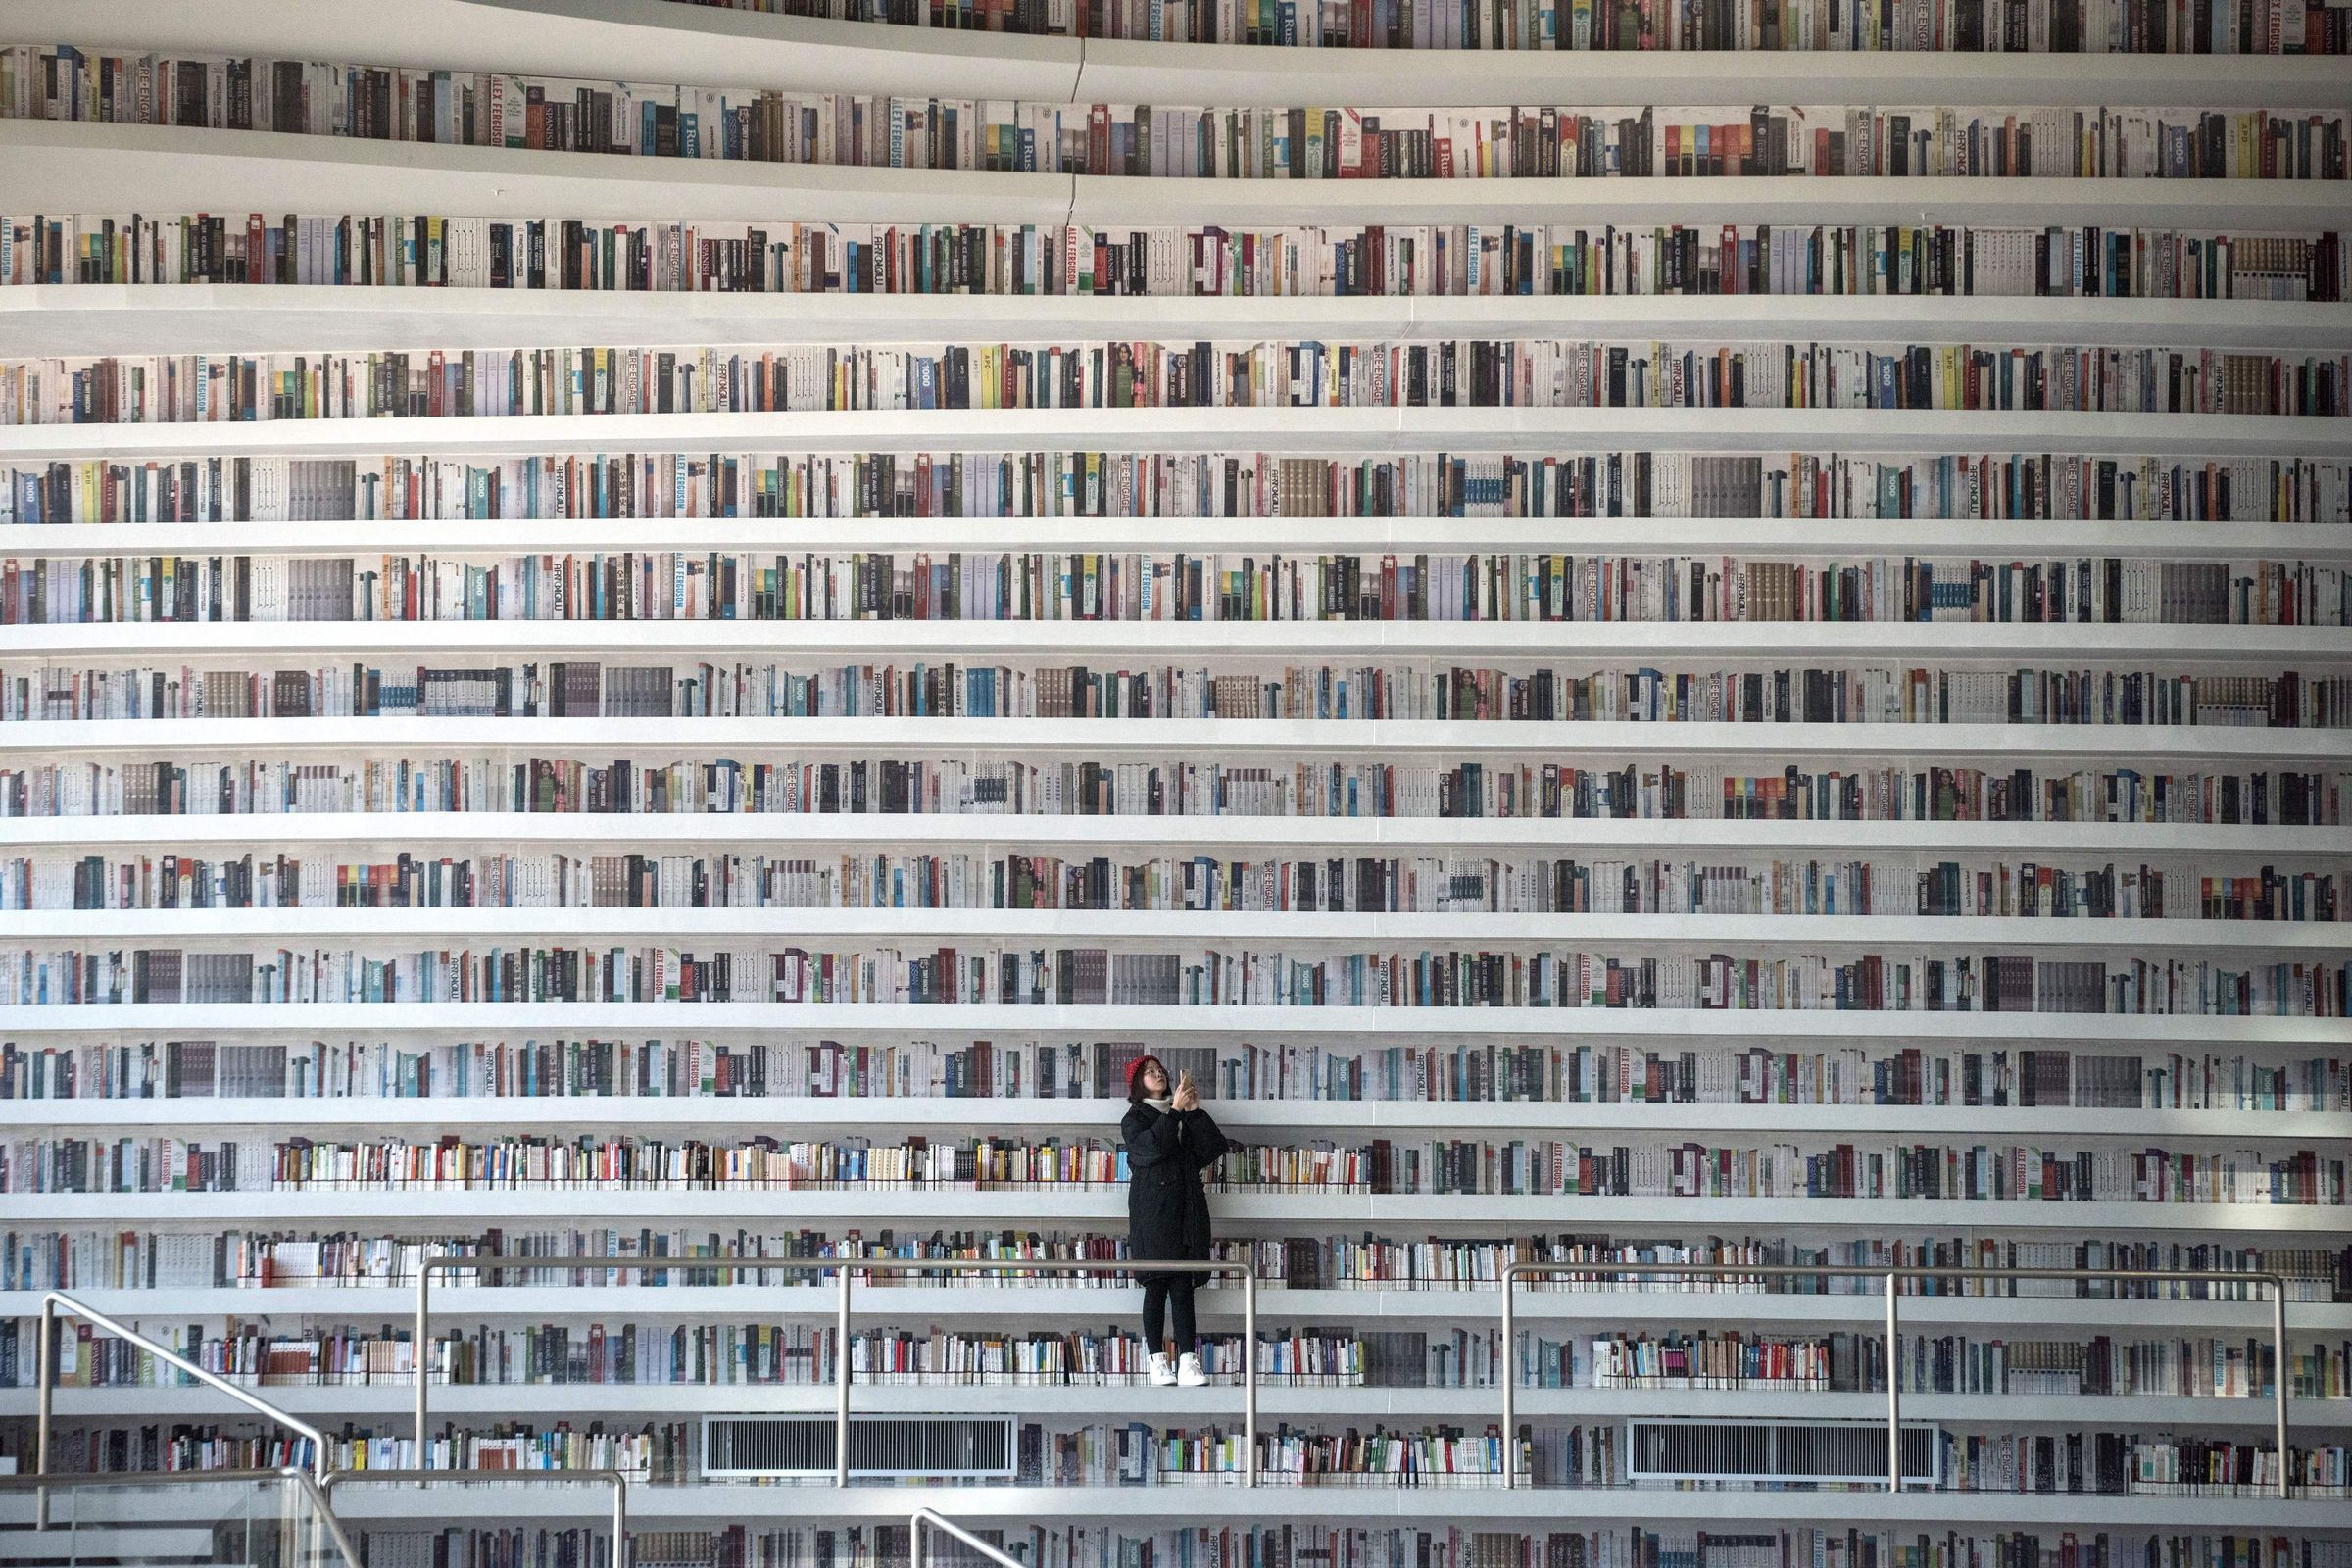 TOPSHOT-CHINA-LIBRARY-ARCHITECTURE